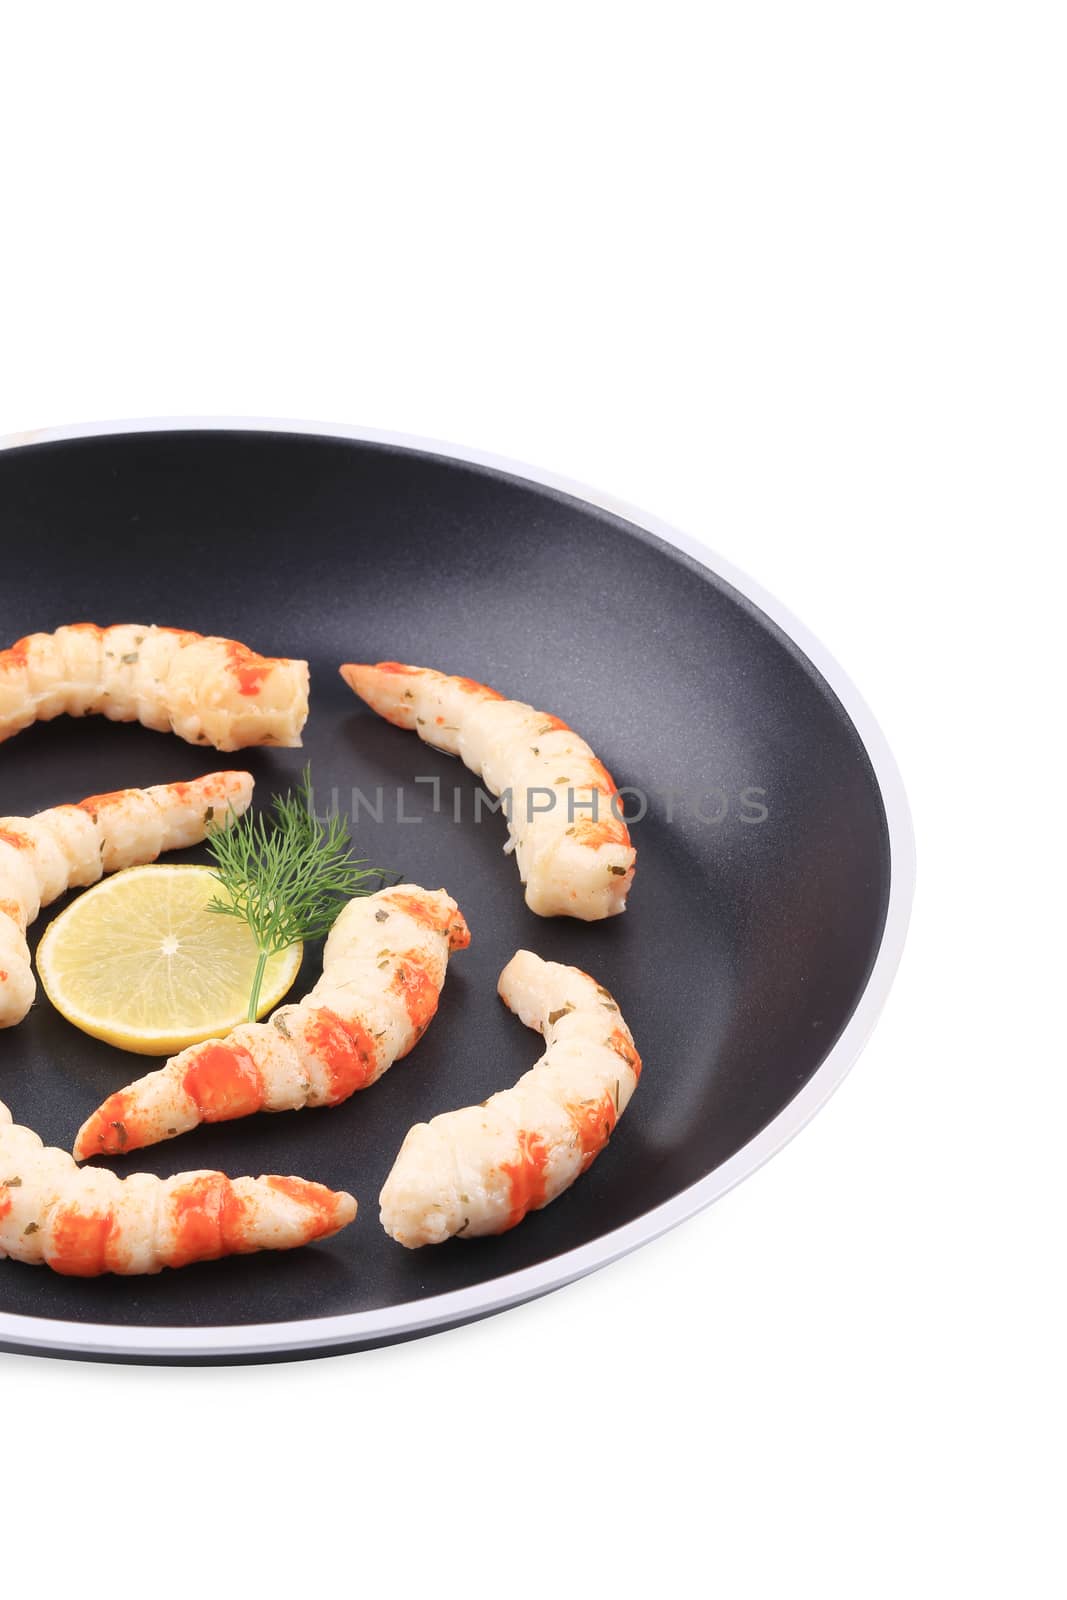 Cooked unshelled shrimps on frying pan. Whole background.